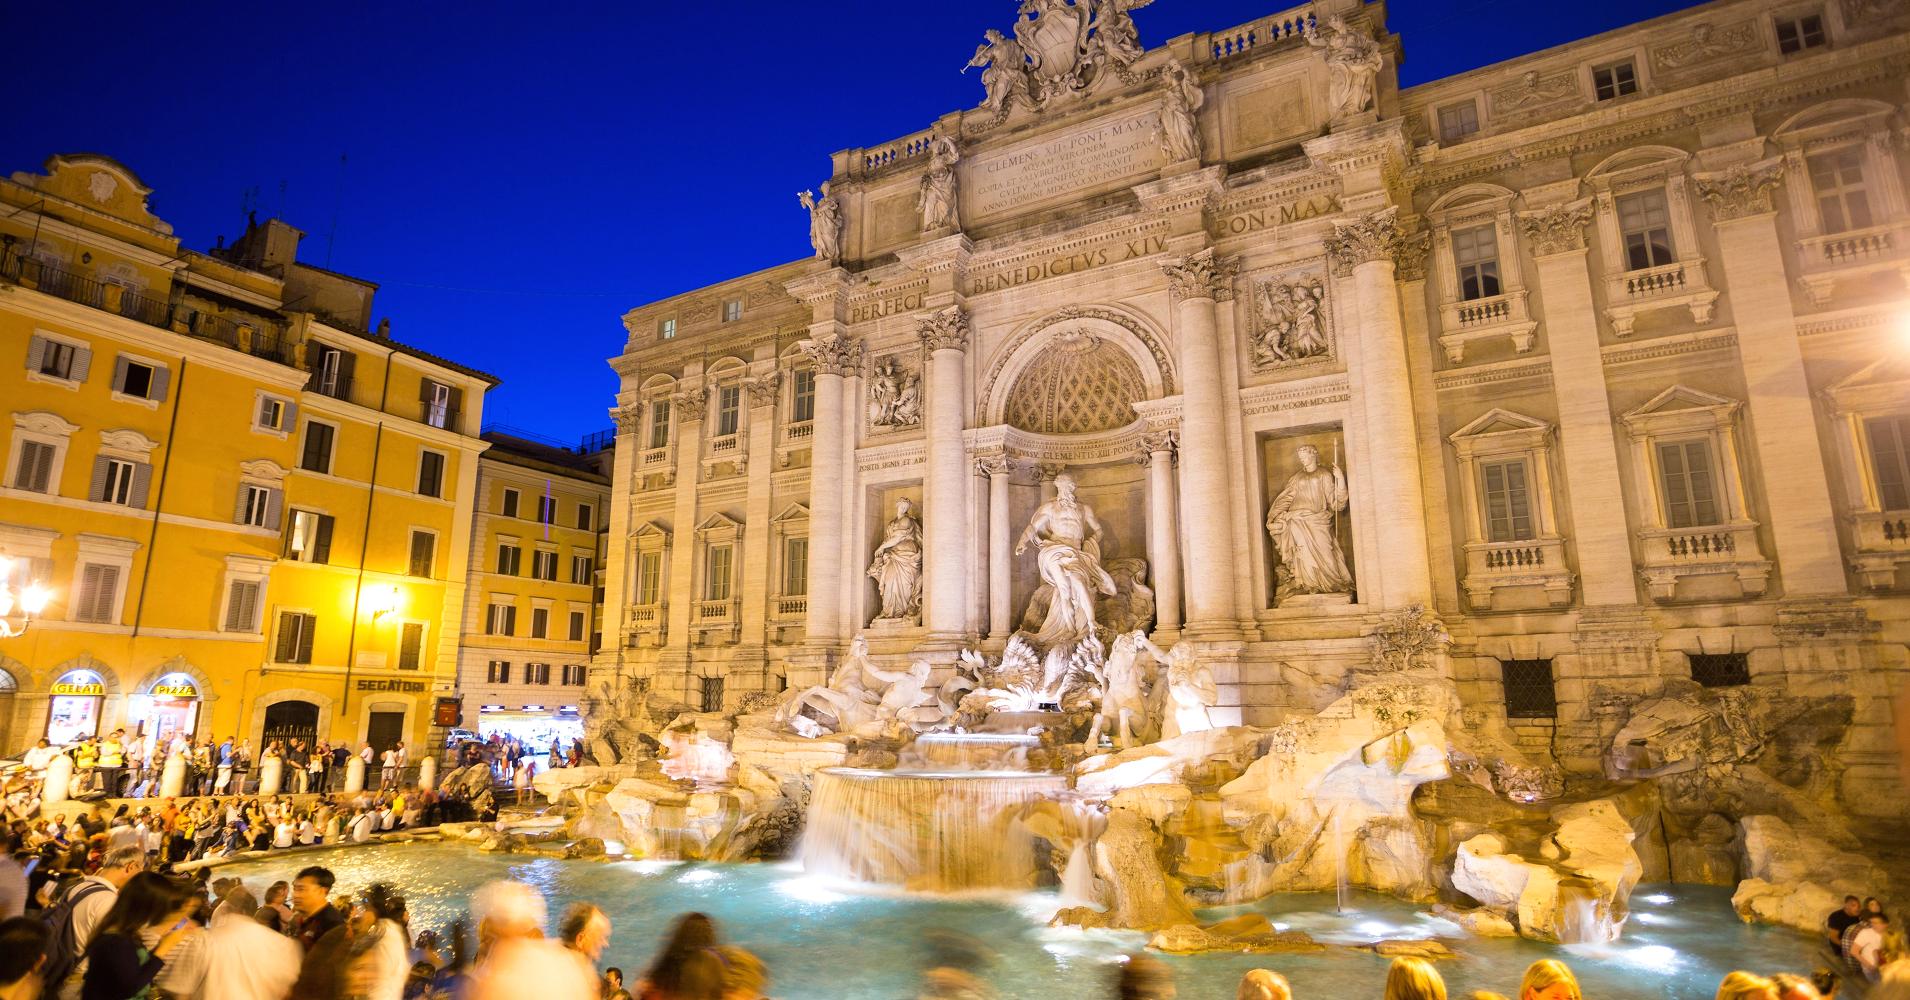 Images of Trevi Fountain | 1910x1000